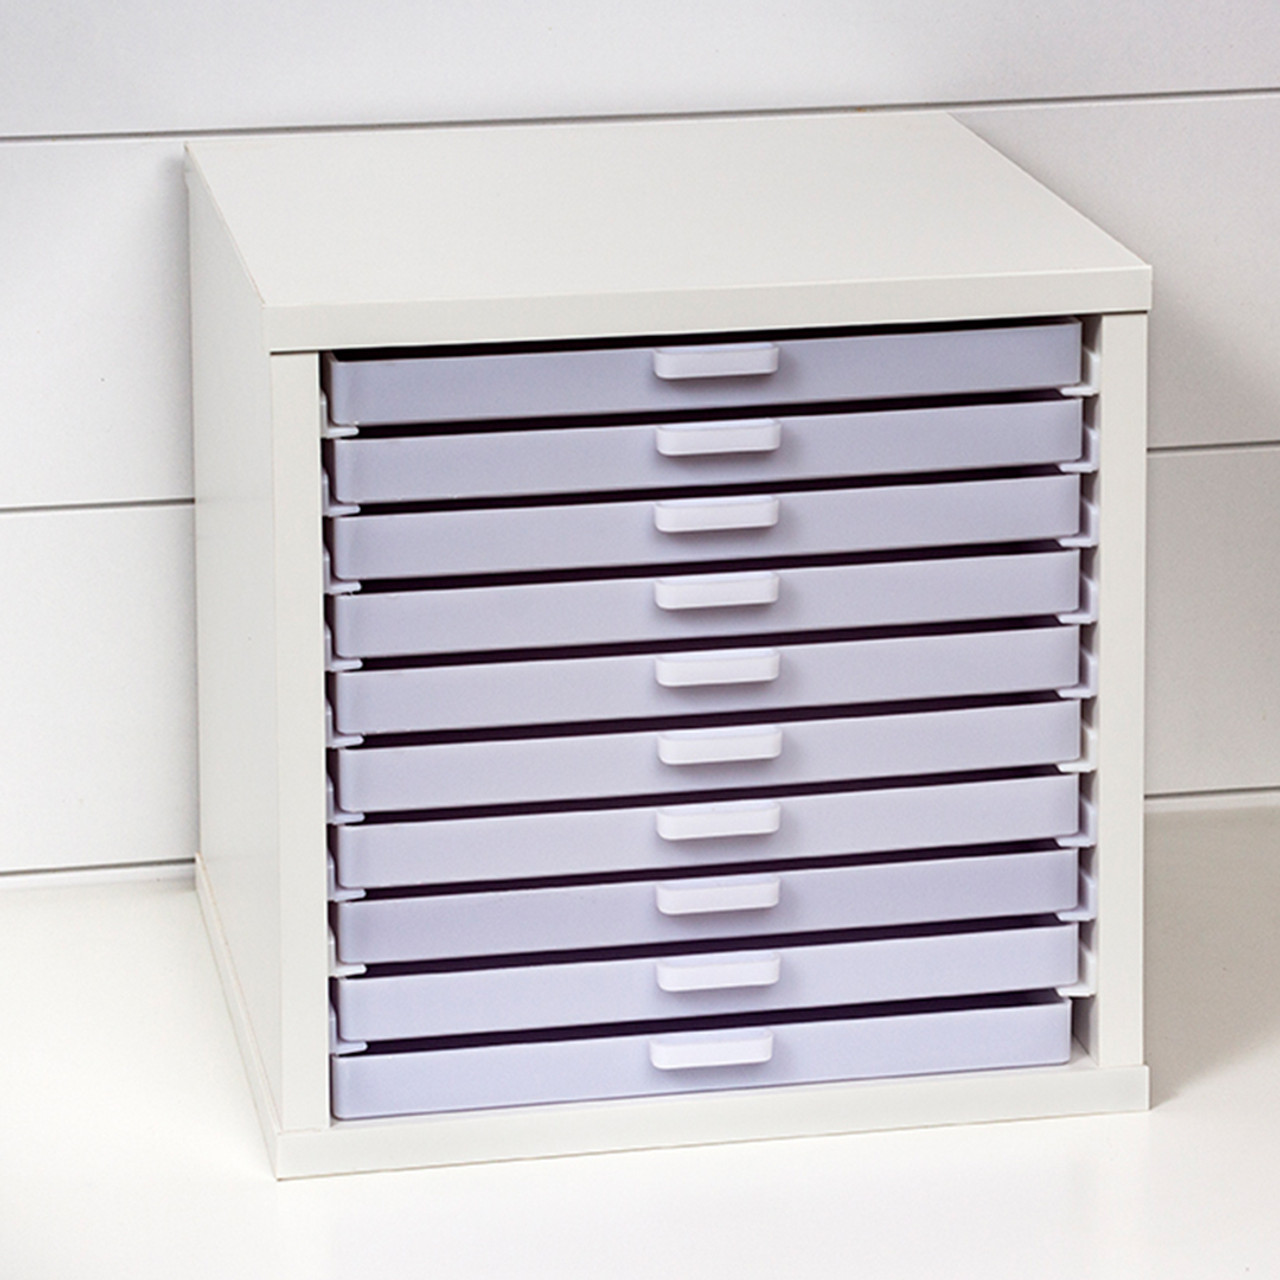 Storage Cube for Stackable Drawers or Paper Shelves